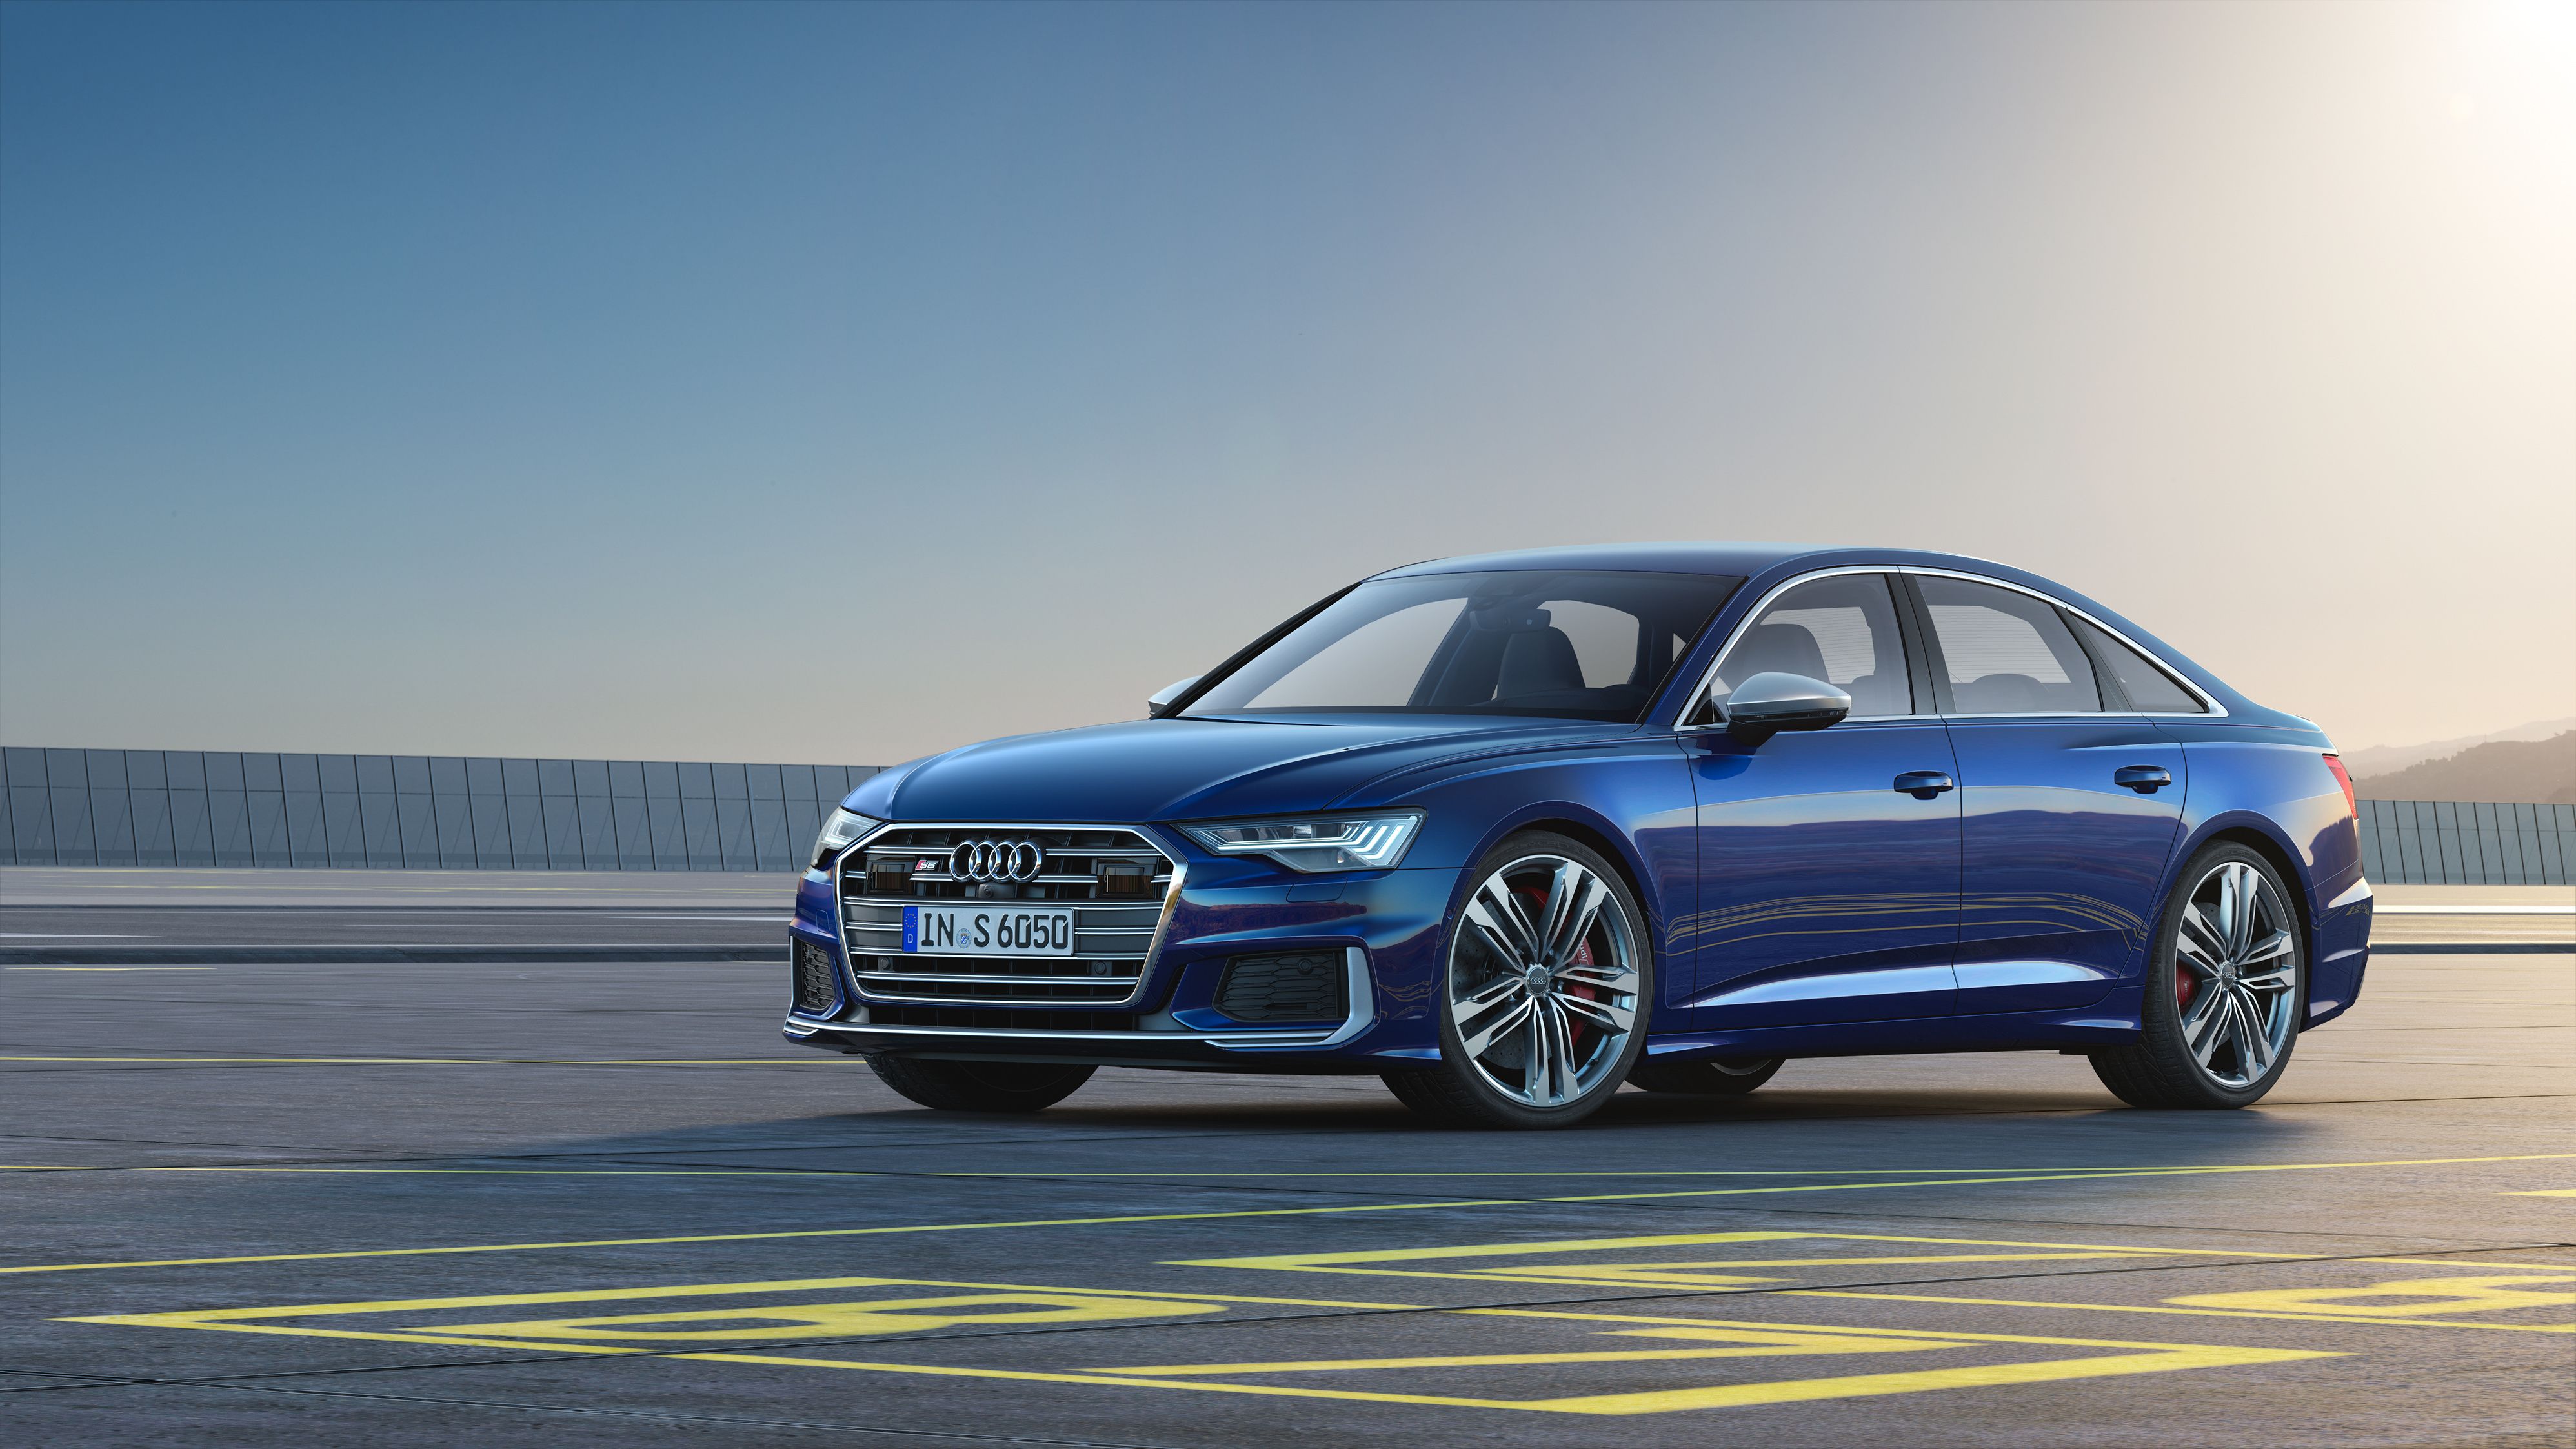 2020 Audi S6 Makes 444 HP and Starts under $75,000